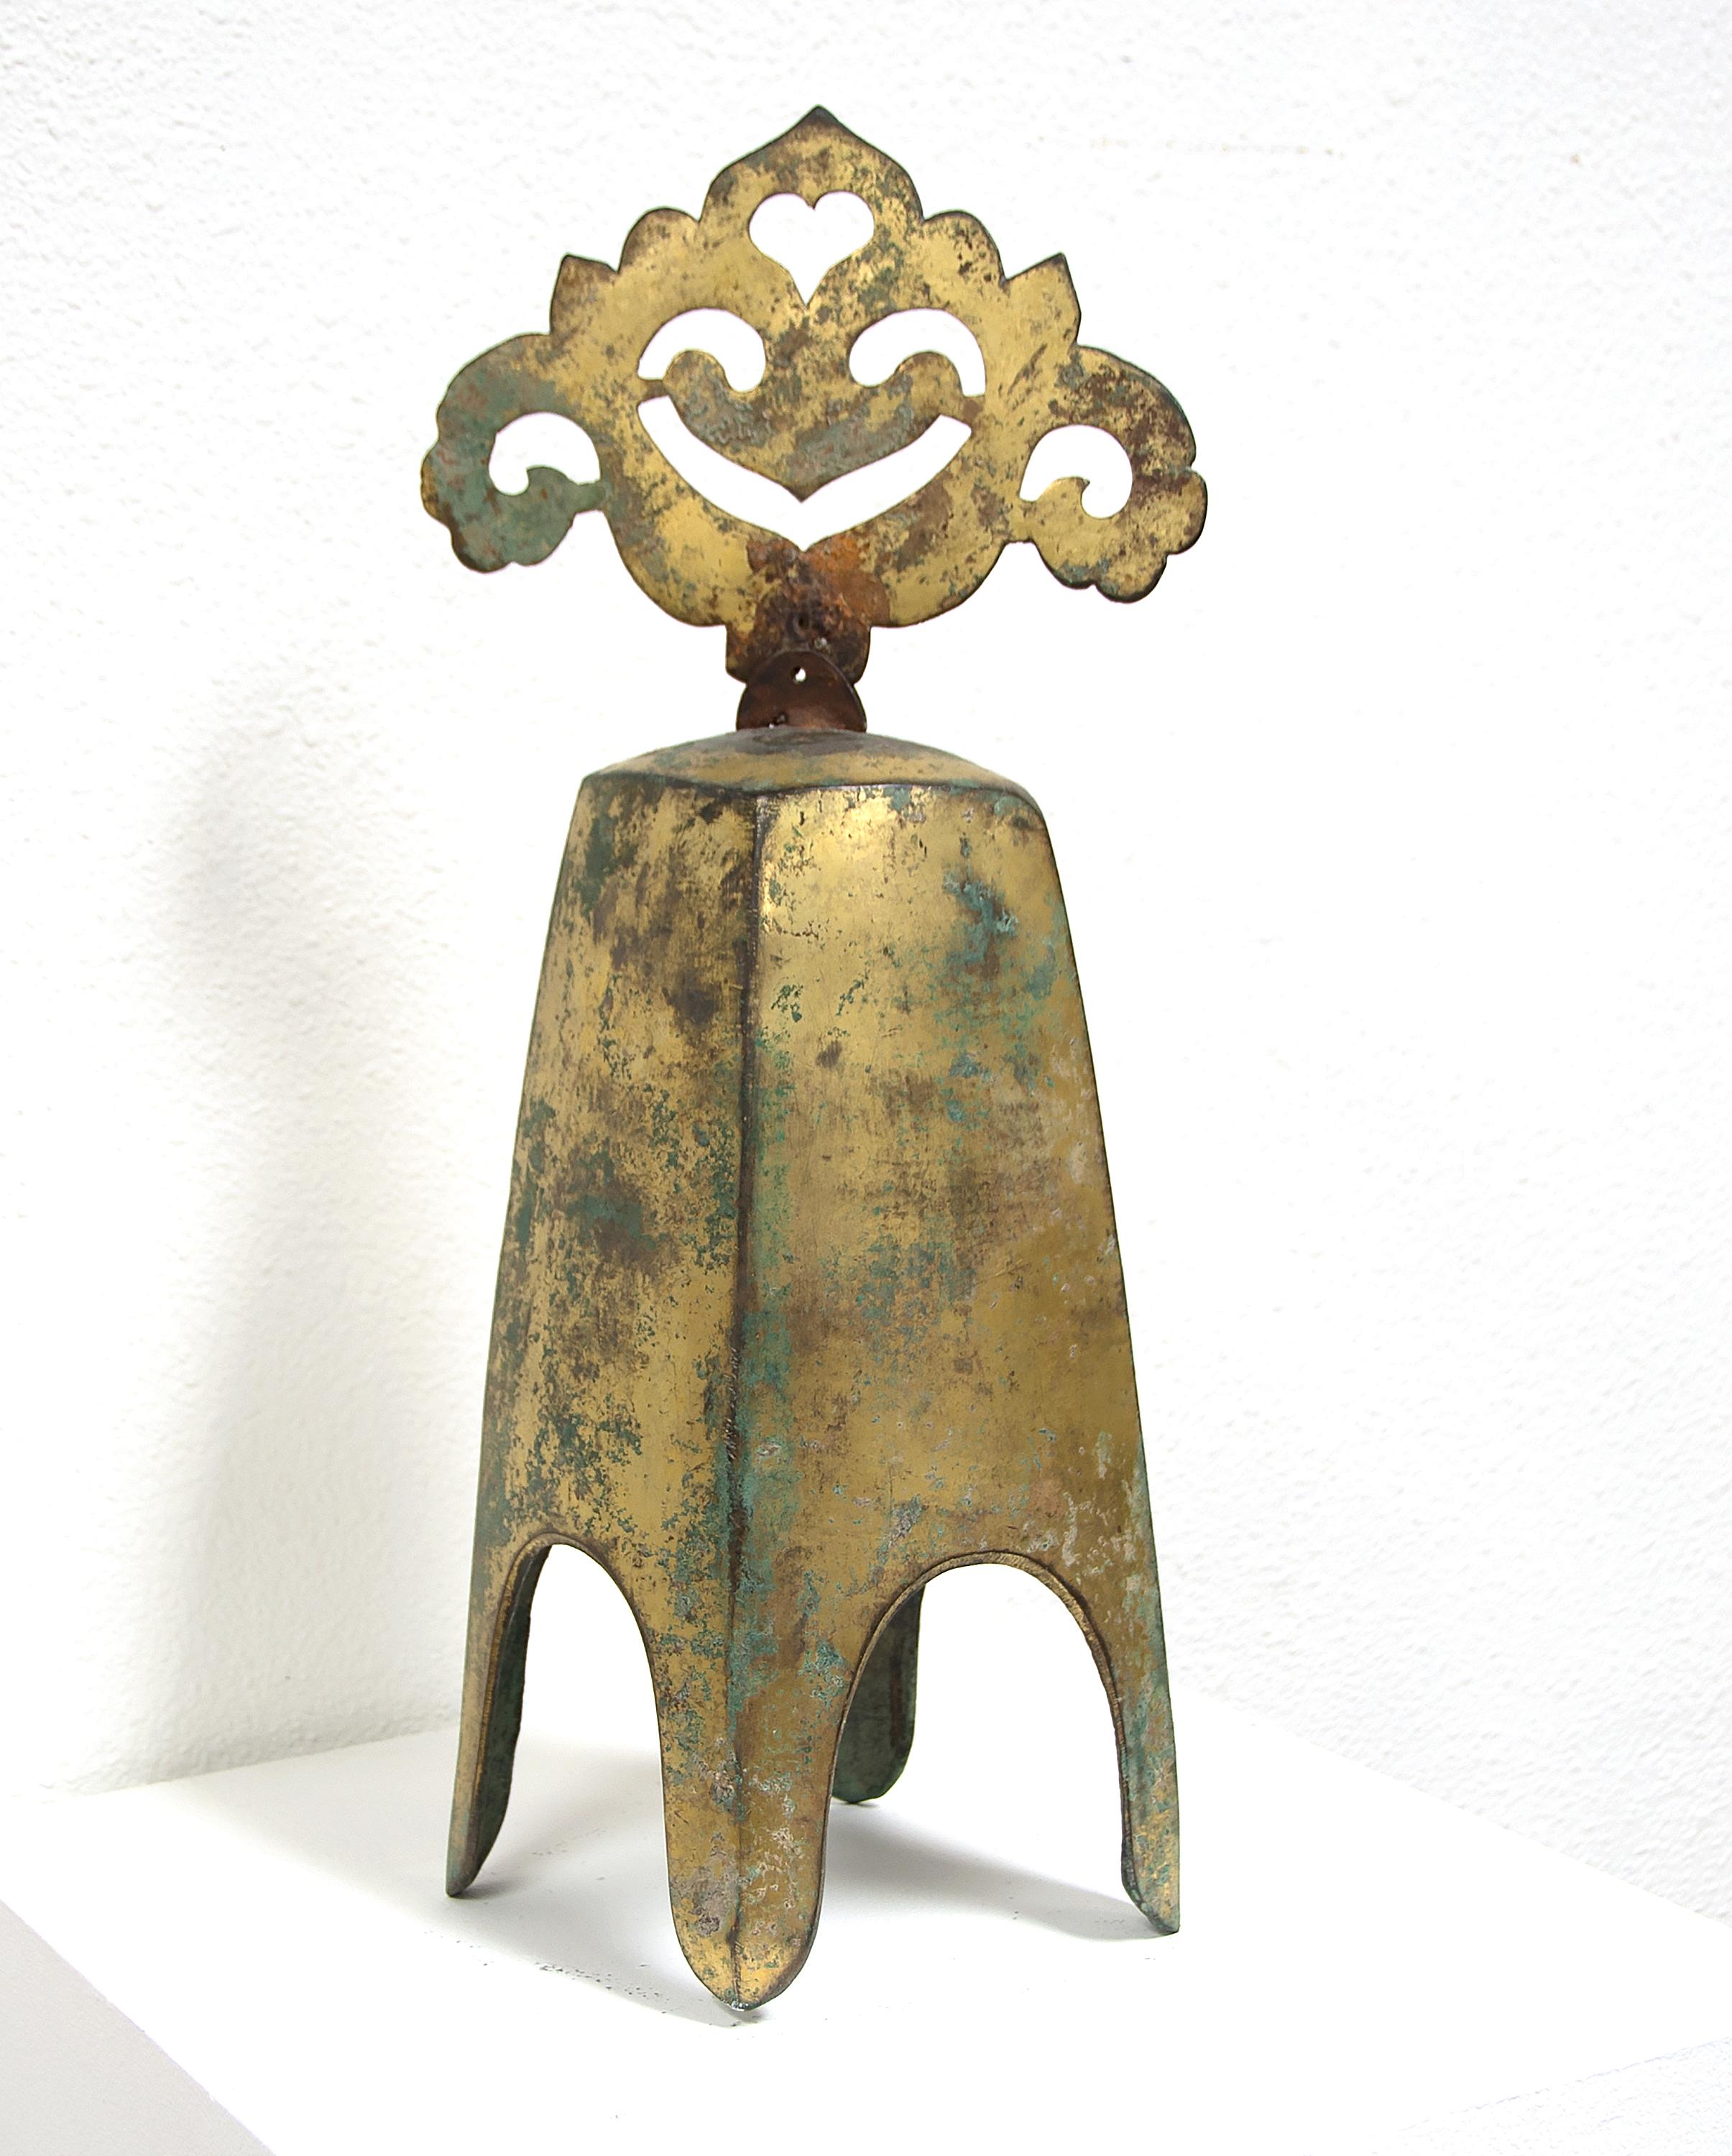 A Chinese Procession Ornament dating from the Liao Dynasty, from 907 to 1125 AD. The Liao Dynasty, also known as the Khitan Empire, was an empire in northern China that ruled over the regions of Manchuria, Mongolia, and parts of northern China